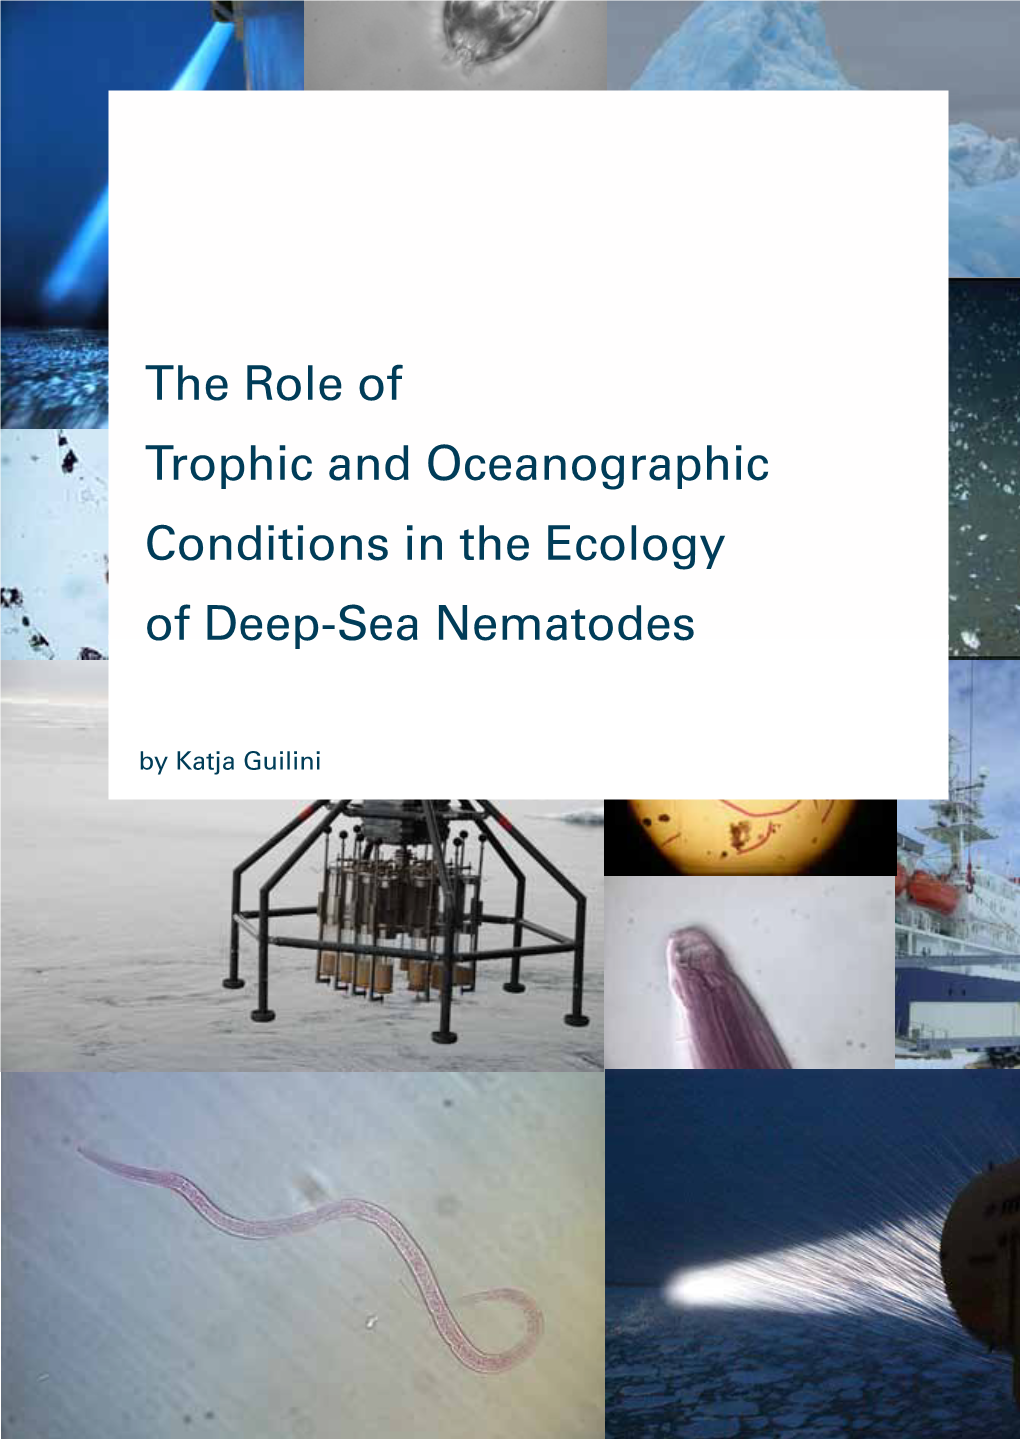 The Role of Trophic and Oceanographic Conditions in the Ecology of Deep-Sea Nematodes